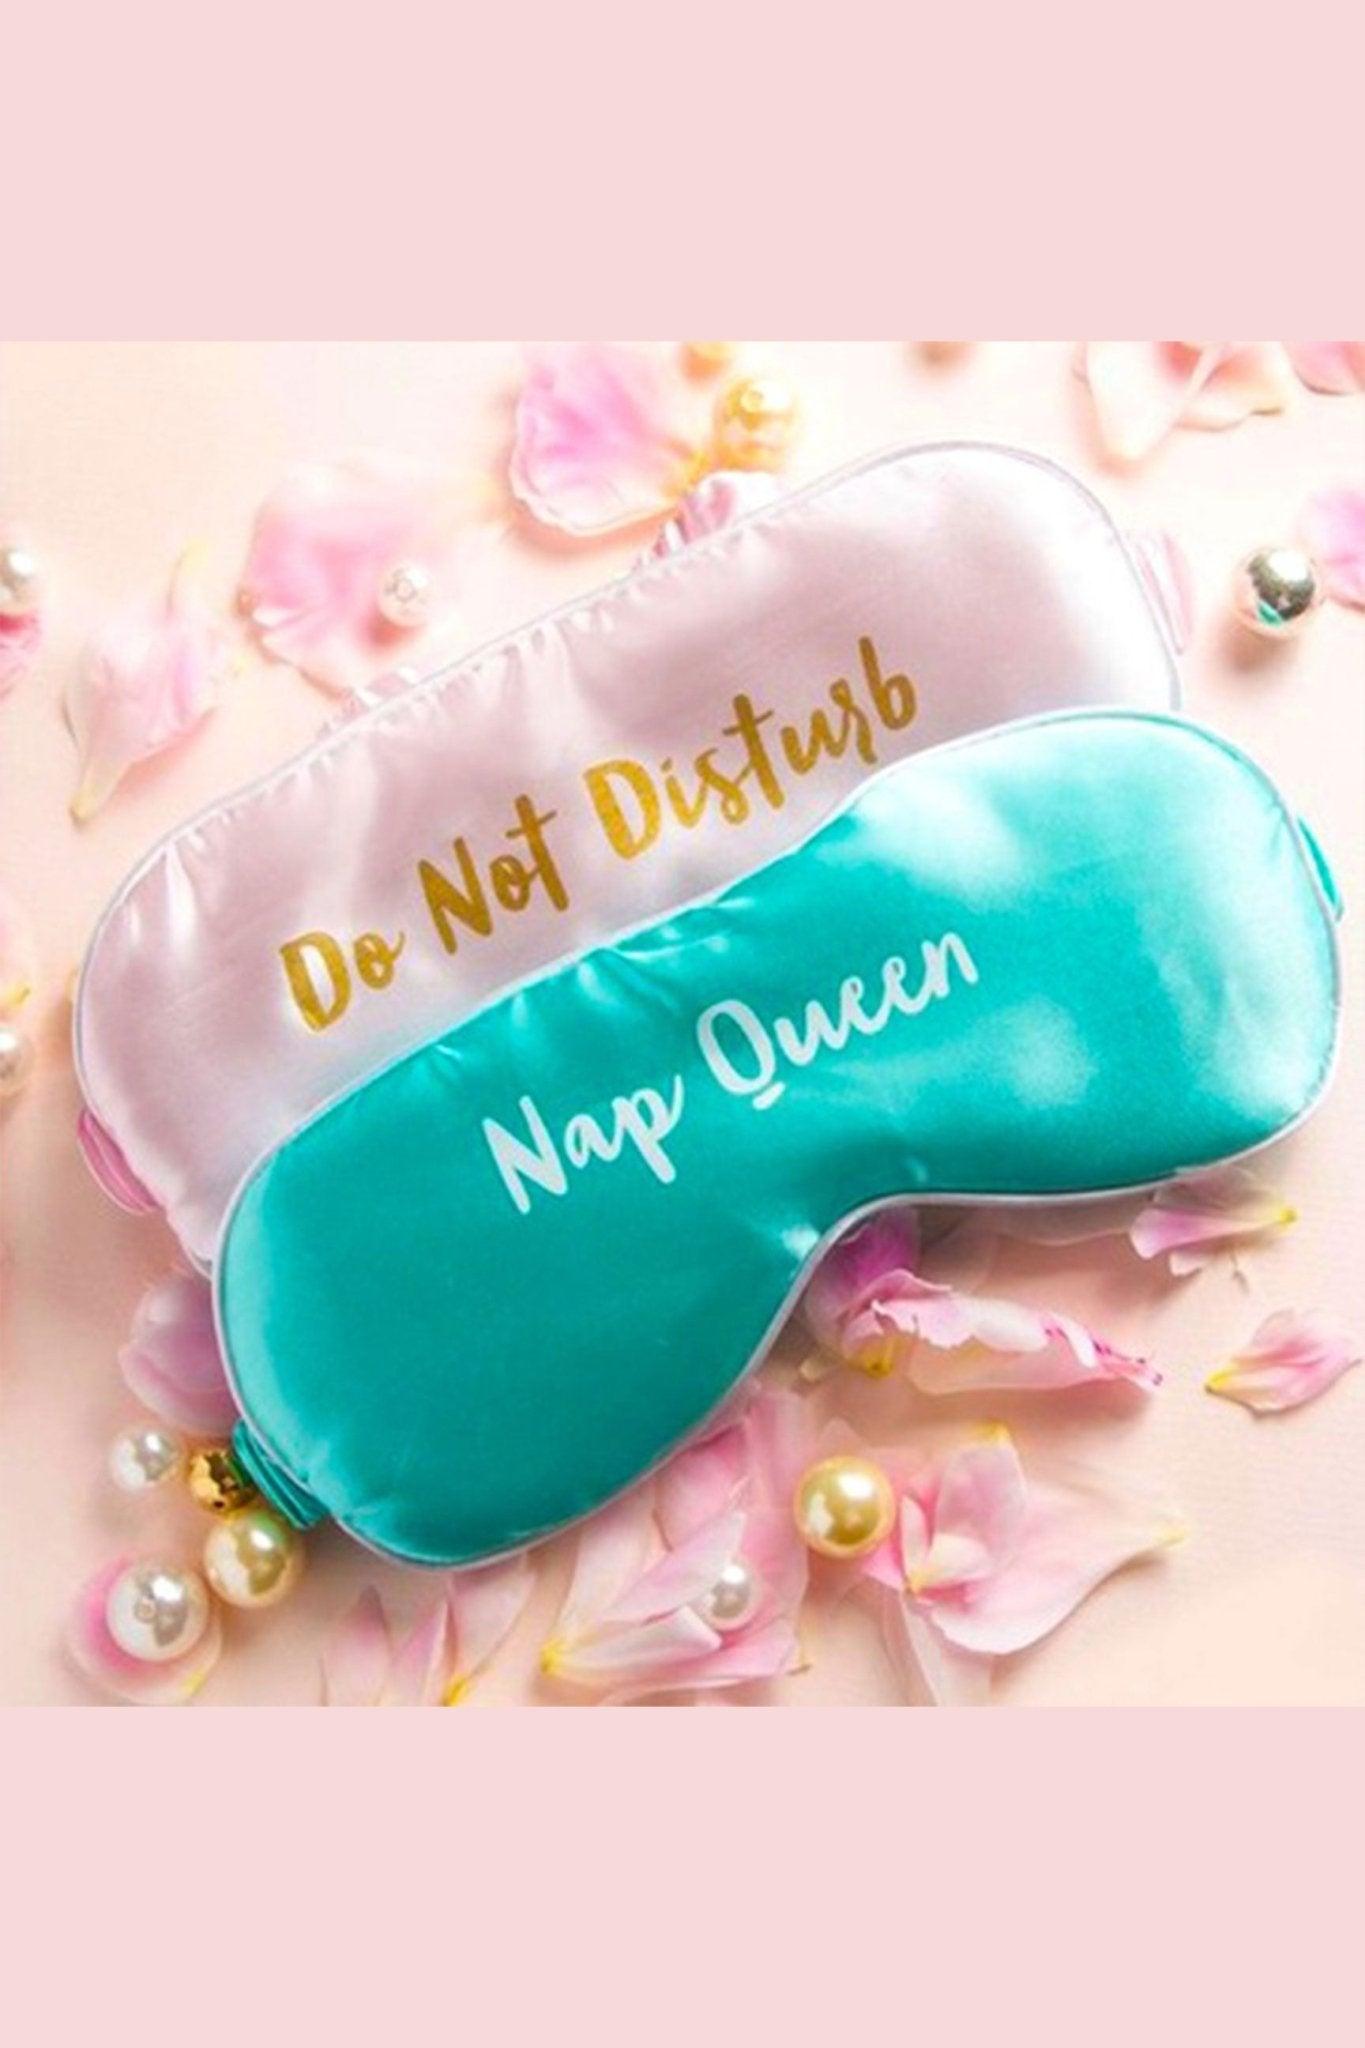 SILKY SMOOTH TIFFANY BLUE NAP QUEEN SLEEP MASK - MY SEXY STYLES